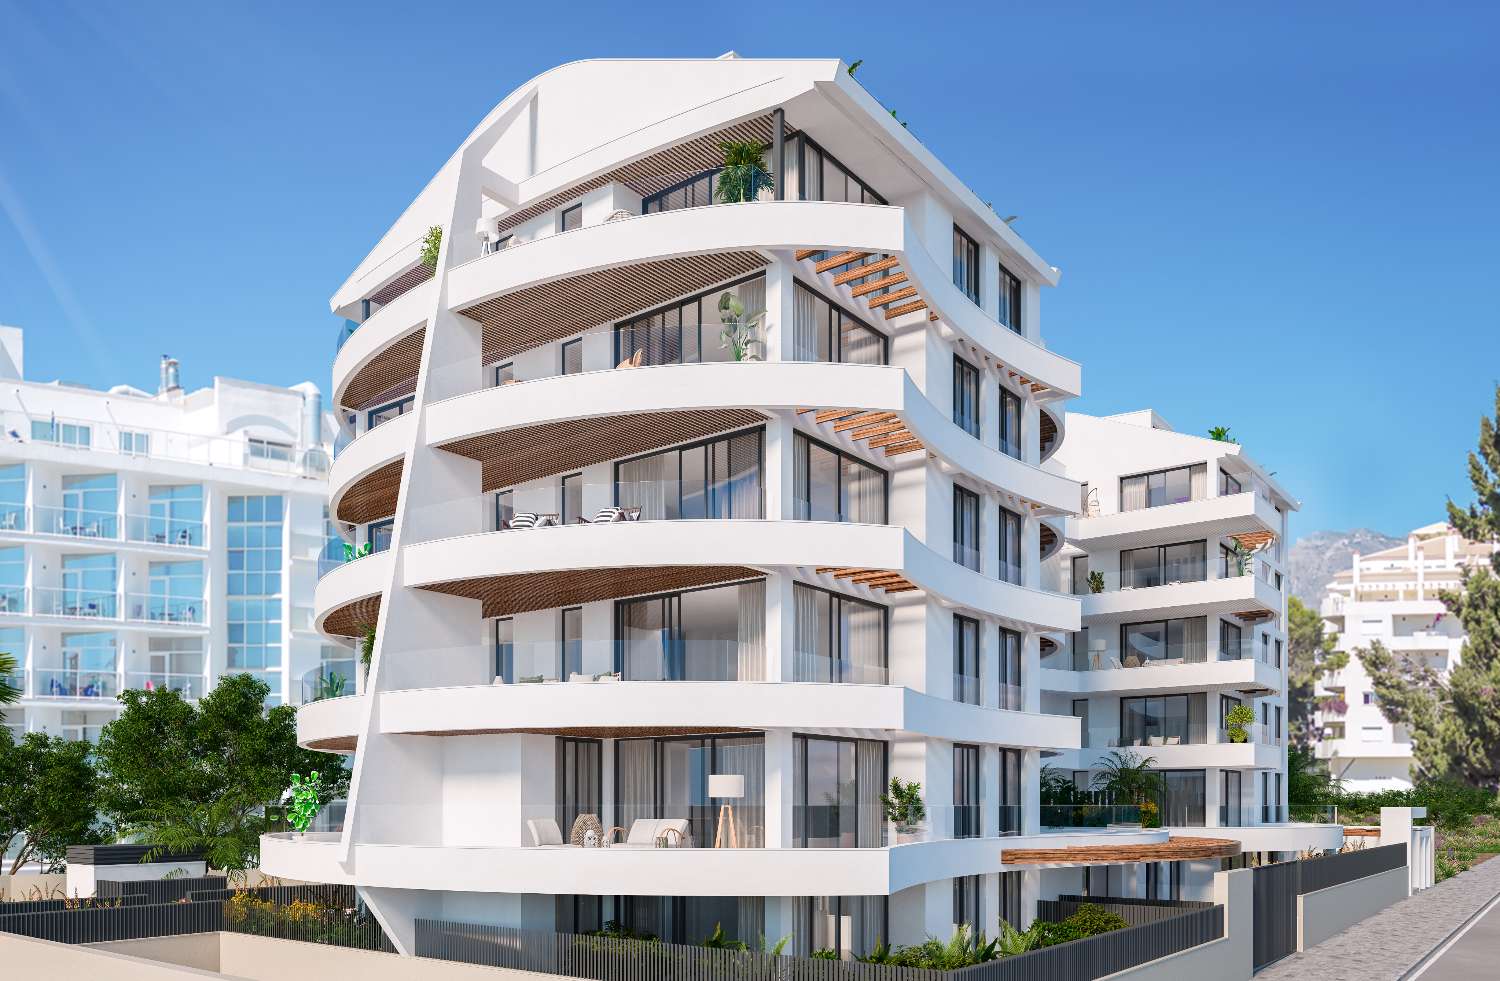 Excellent new construction building just a step away from Puerto Marina, Benalmádena!